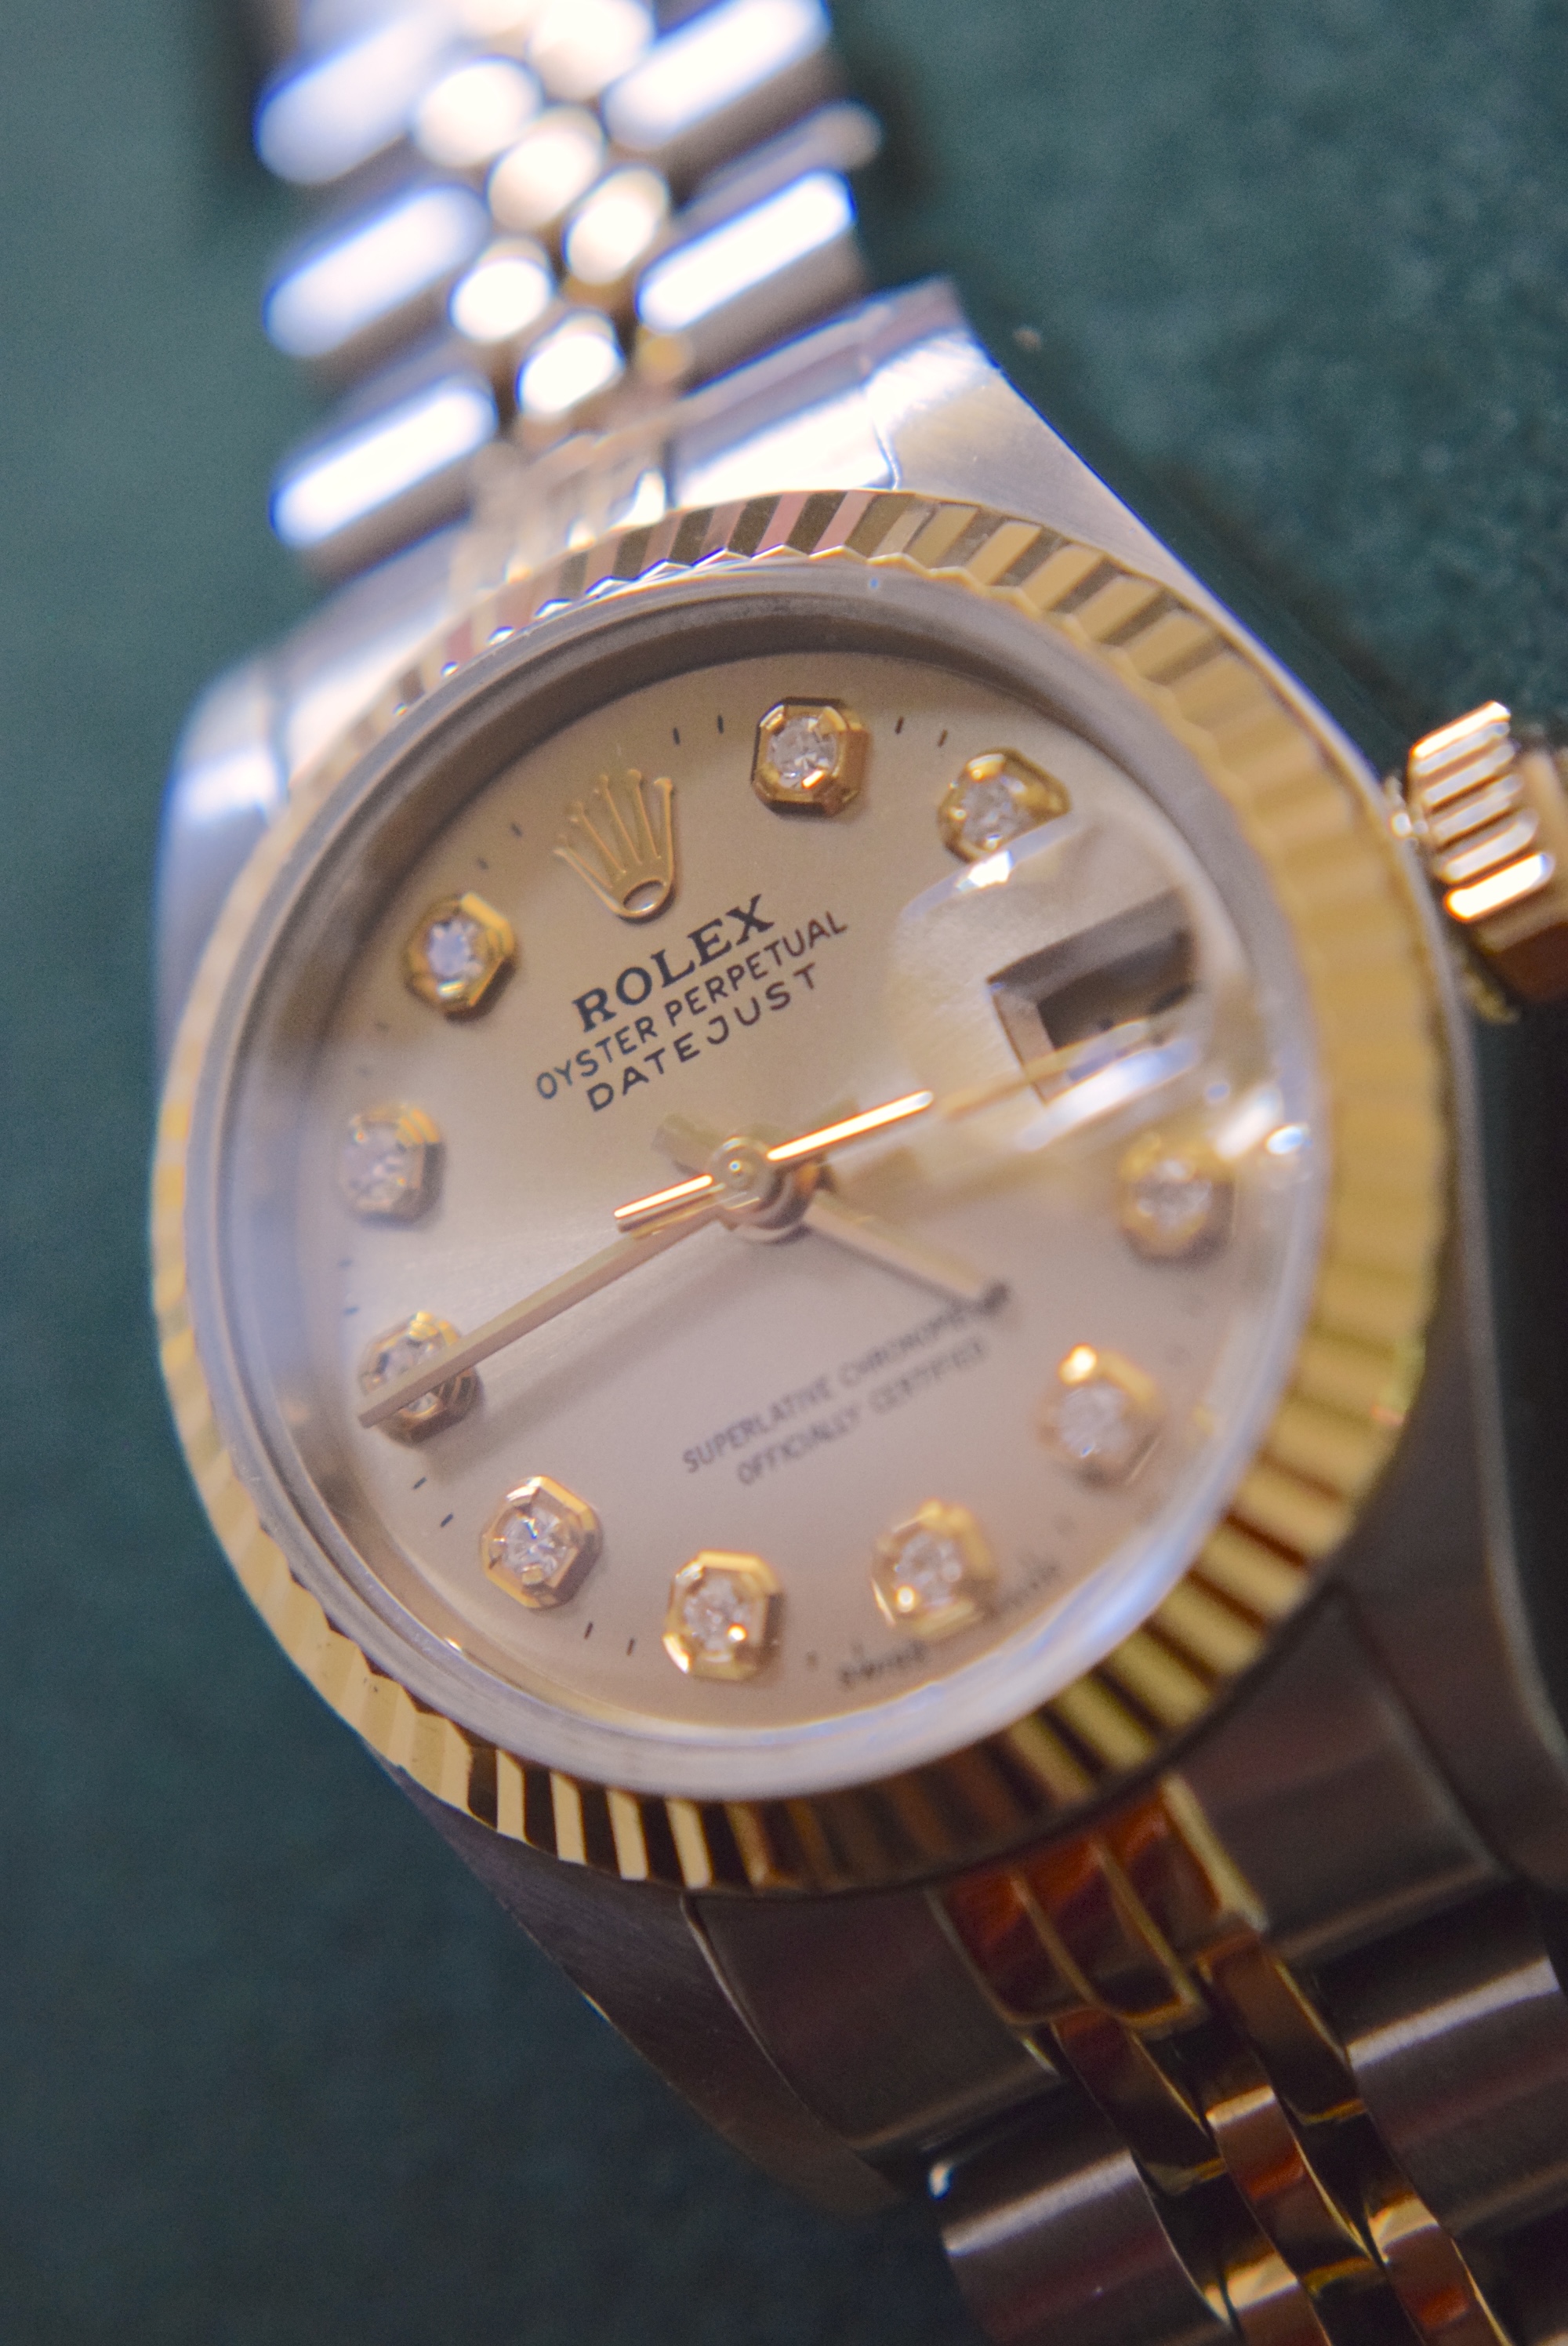 ROLEX DATEJUST 18CT GOLD/ STEEL 26MM LADIES MODEL (69173) - DIAMOND CHAMPAGNE DIAL - £9995 VALUATION - Image 5 of 10